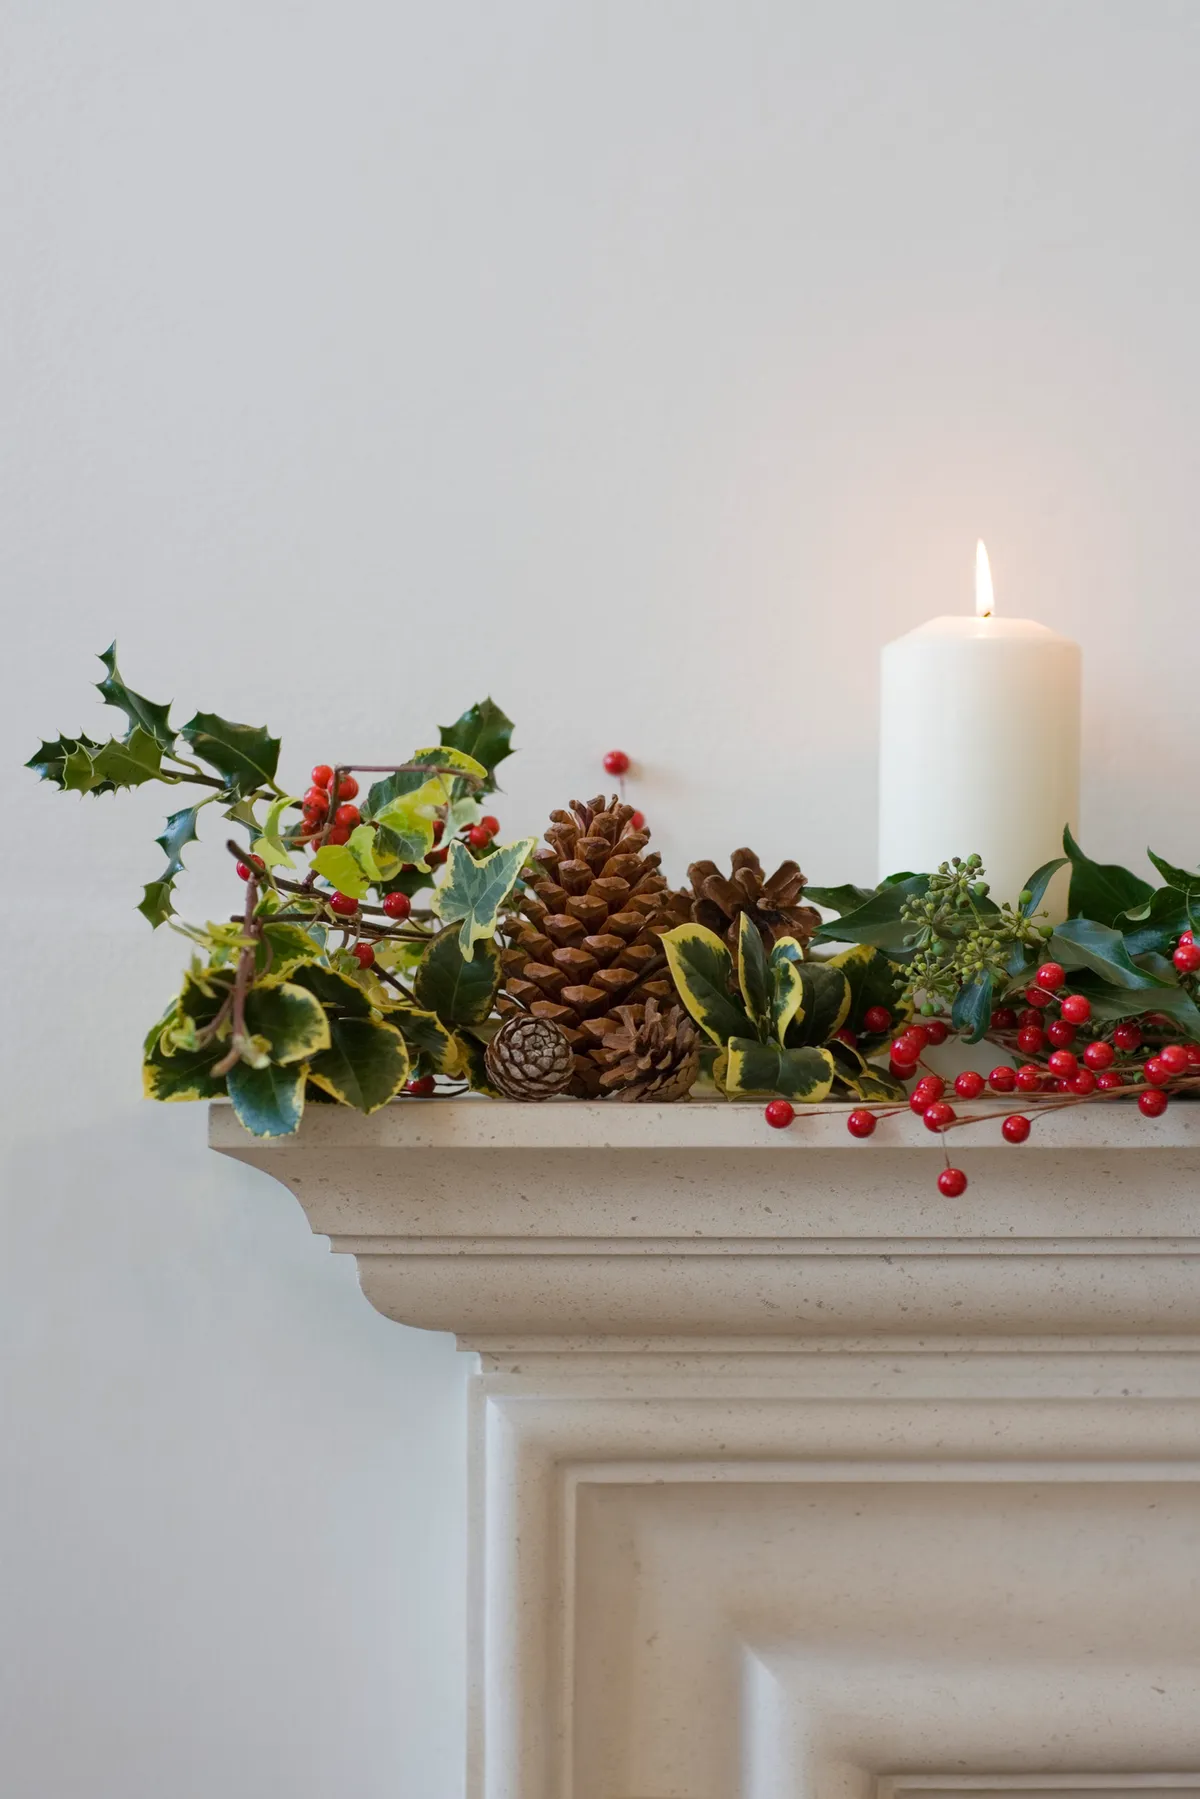 Use natural materials to decorate rather than tinsel and other plastics. Polka Dot Images/Getty